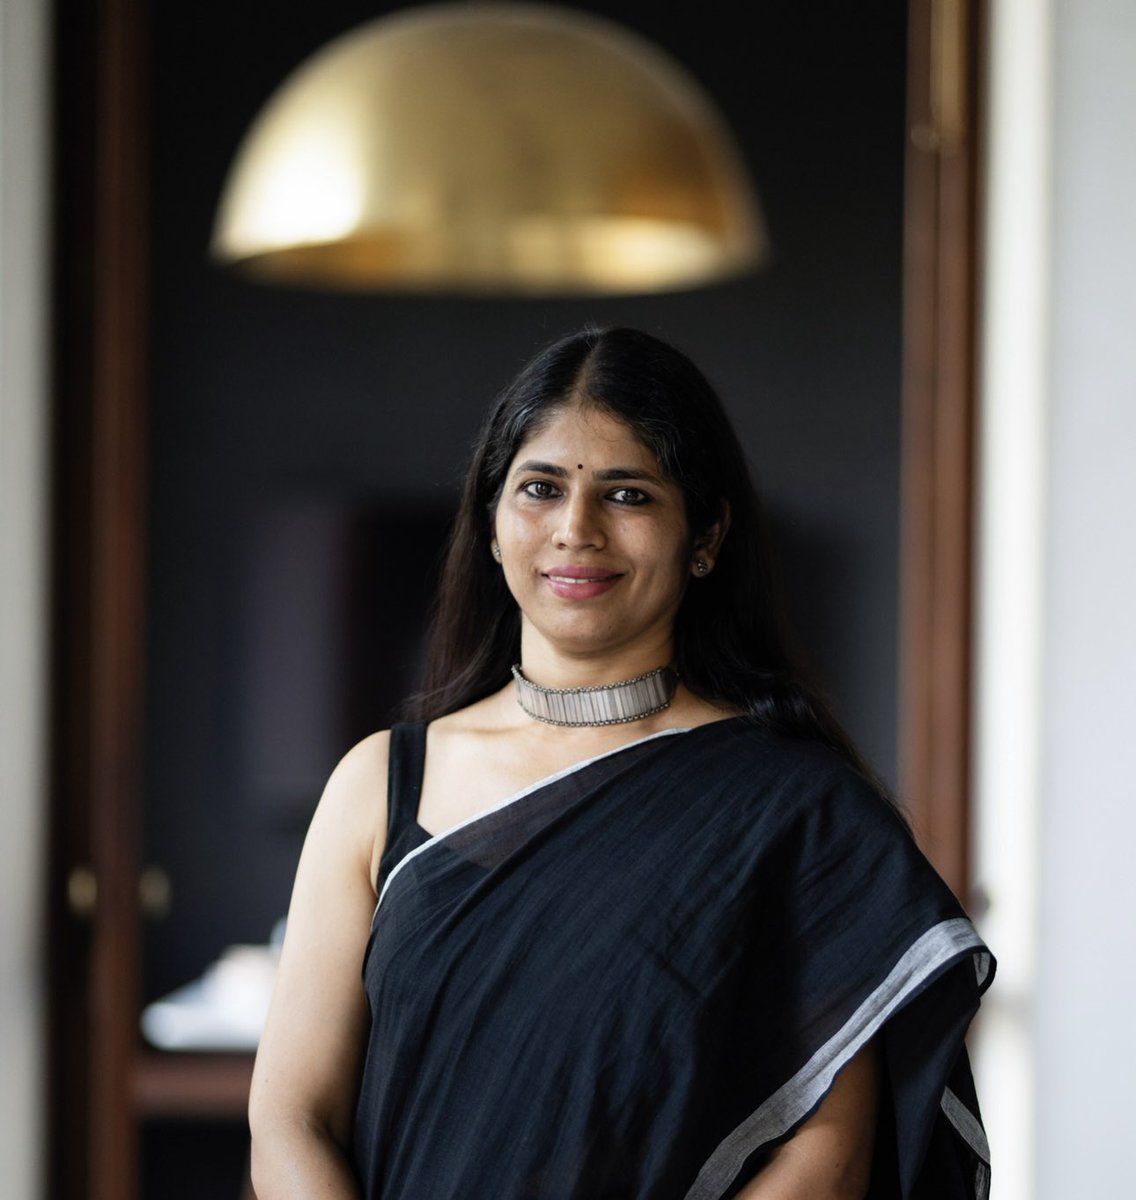 Redefining beauty and inclusivity in architecture: Interview with Sarika Shetty, Partner at SJK Architects✨

Read More- commercialdesignindia.com

#officeinspiration #theoffice #officegoals #officestyle #workplacegoals #workplacedesig #officegoals #officedesk